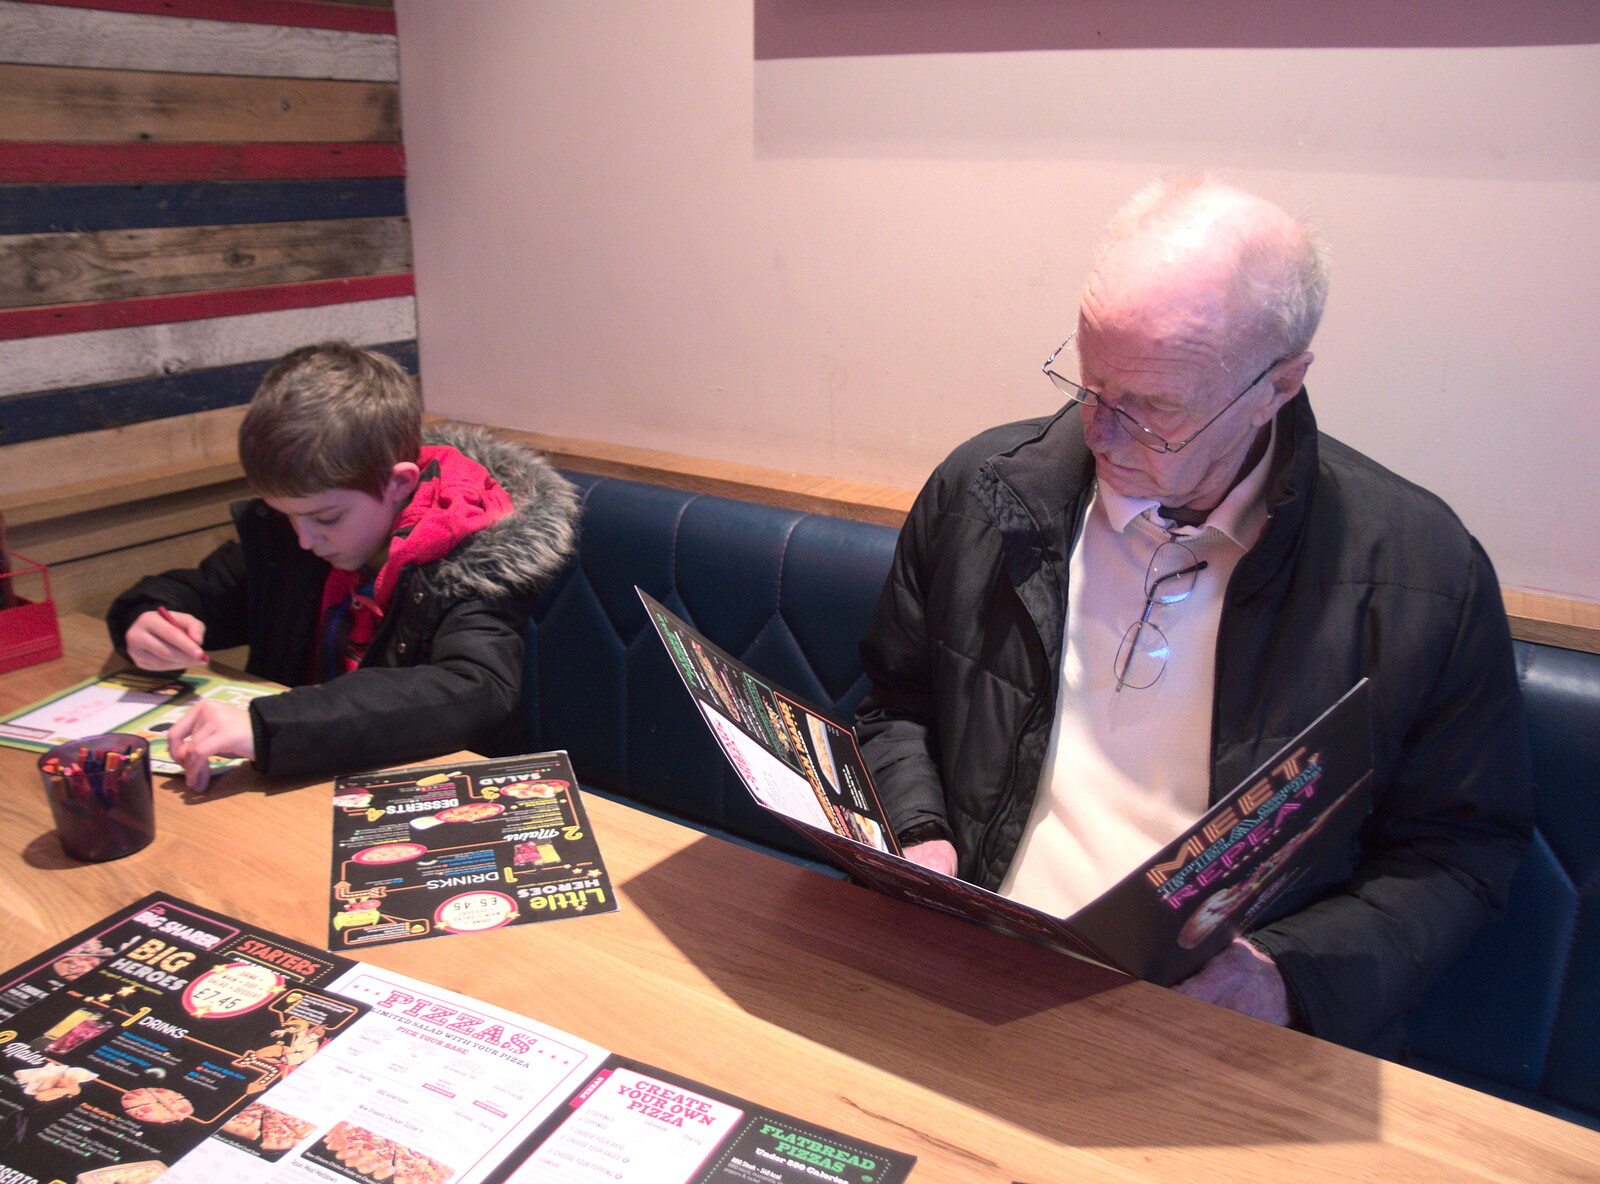 The G-Unit peruses the menu in Pizza Hut from A Couple of Trips to Norwich, Norfolk - 31st March 2018